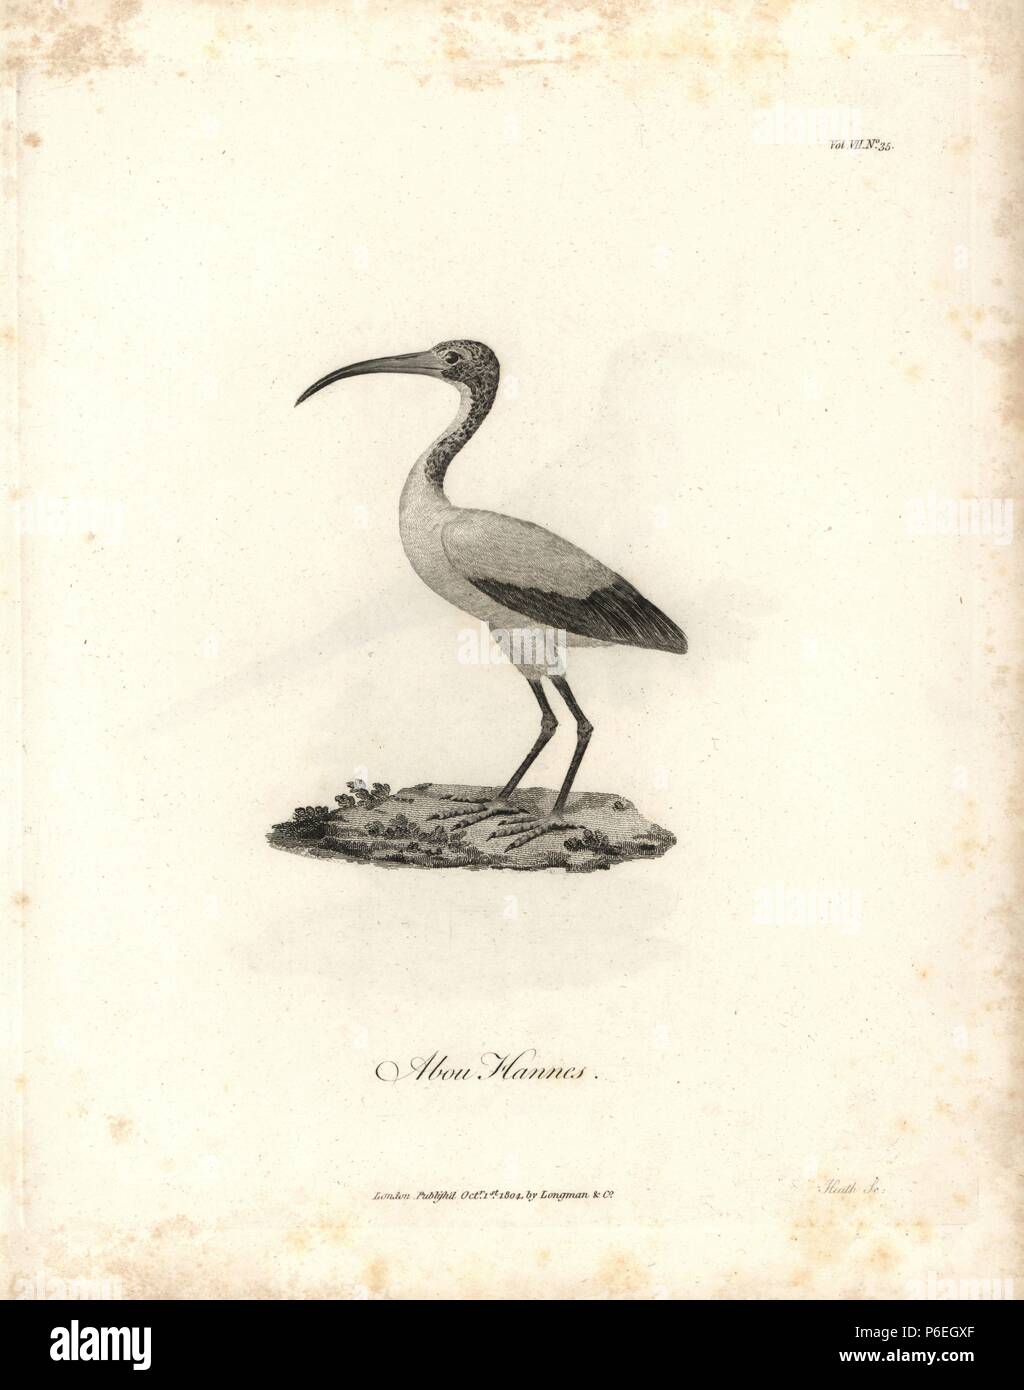 Abou hannes or sacred ibis, Threskiornis aethiopicus. Copperplate engraving from James Bruce's 'Travels to Discover the Source of the Nile, in the years 1768, 1769, 1770, 1771, 1772 and 1773,' London, 1790. James Bruce (1730-1794) was a Scottish explorer and travel writer who spent more than 12 years in North Africa and Ethiopia. Engraved by Heath after an original drawing by Bruce. Stock Photo